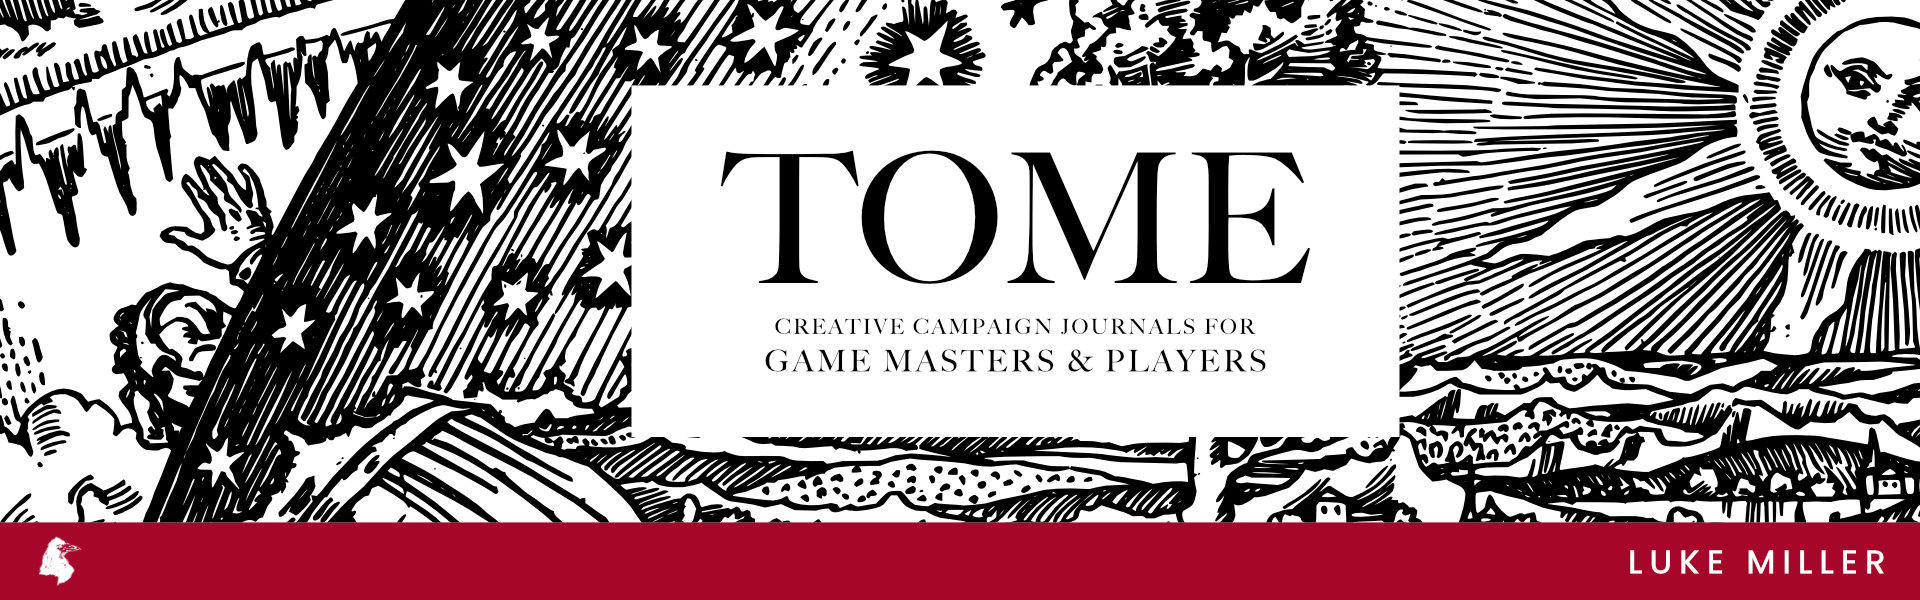 Tome for Game Masters, Volume 2